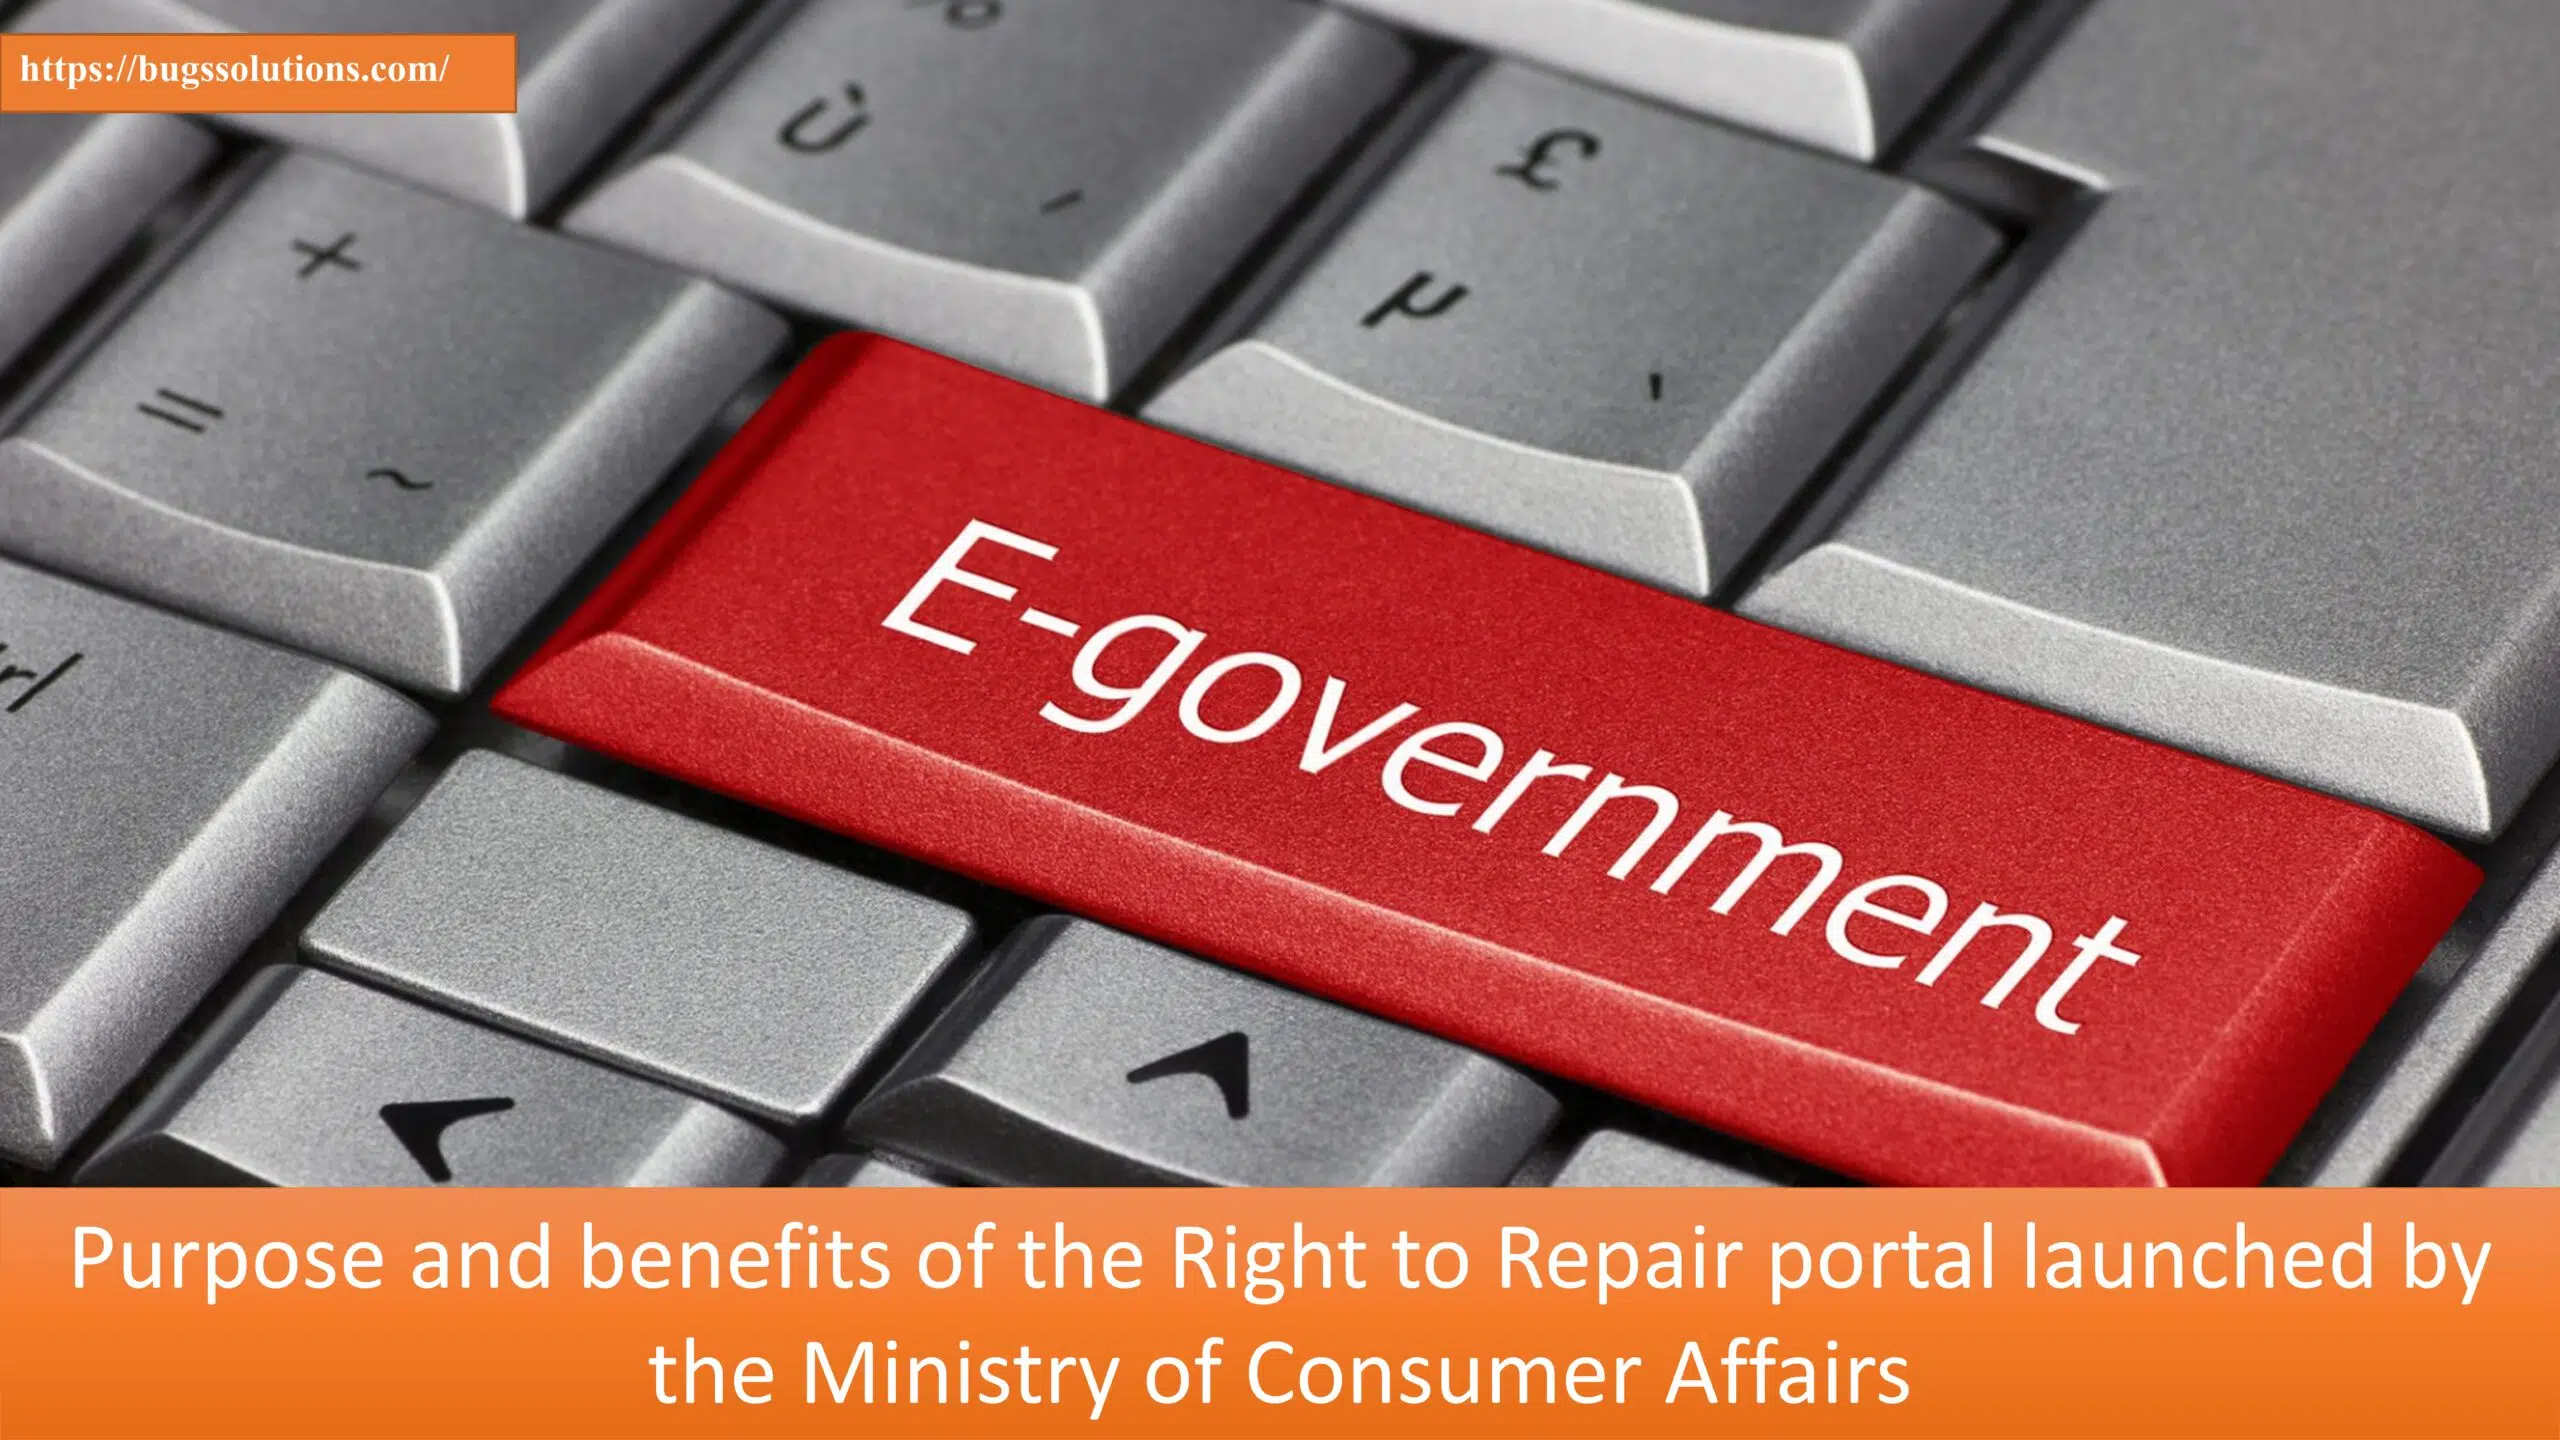 purpose and benefits of the Right to Repair portal launched by the Ministry of Consumer Affairs